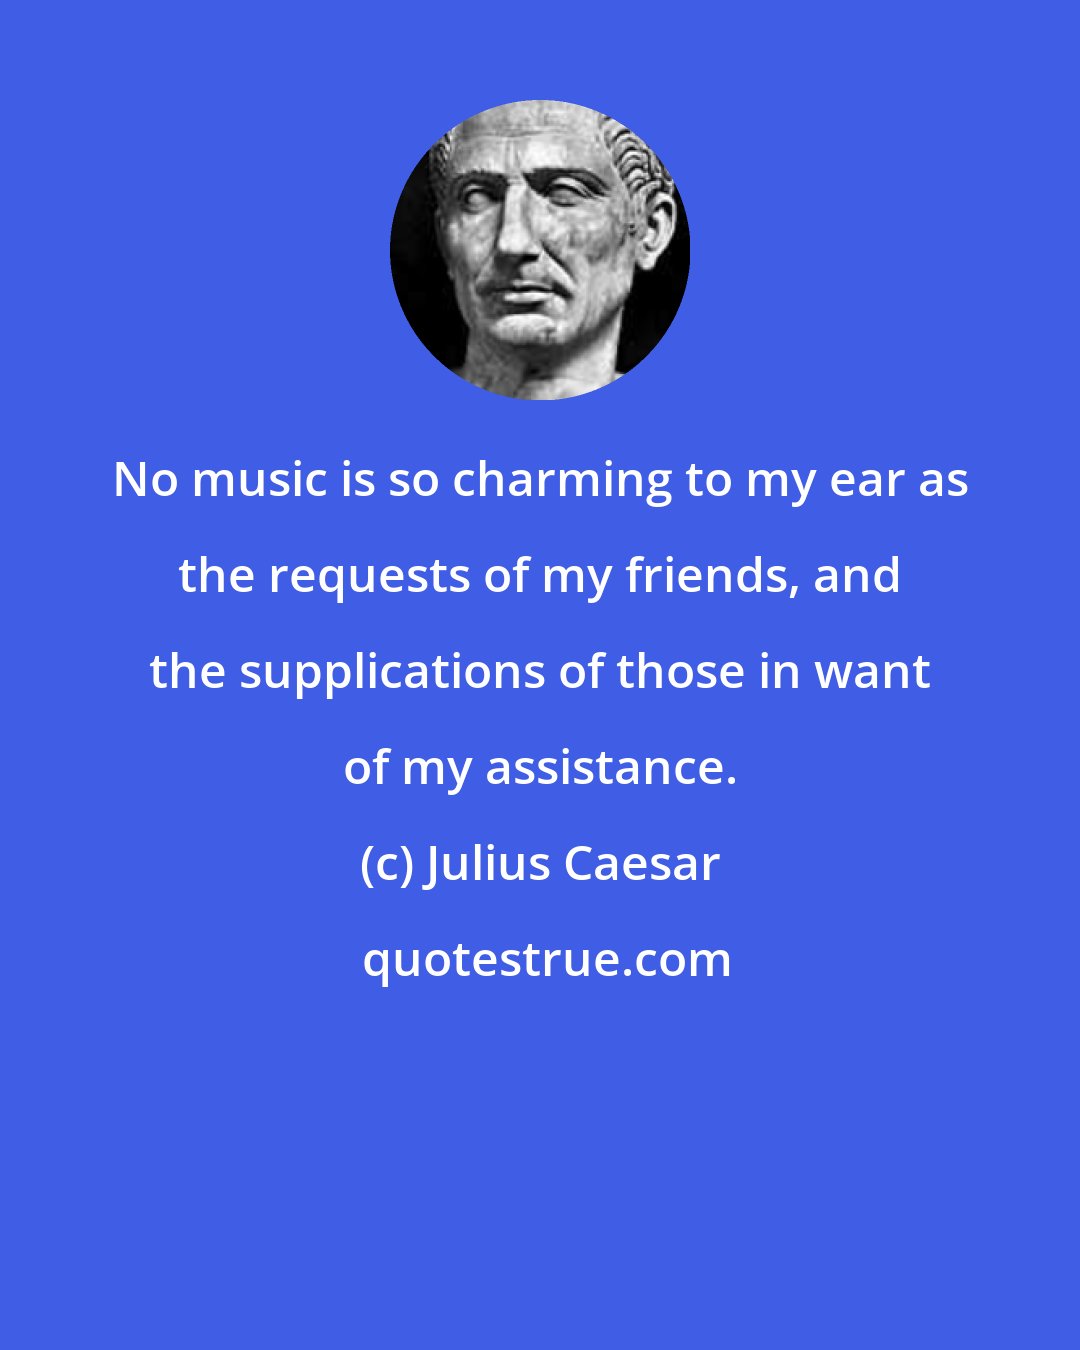 Julius Caesar: No music is so charming to my ear as the requests of my friends, and the supplications of those in want of my assistance.